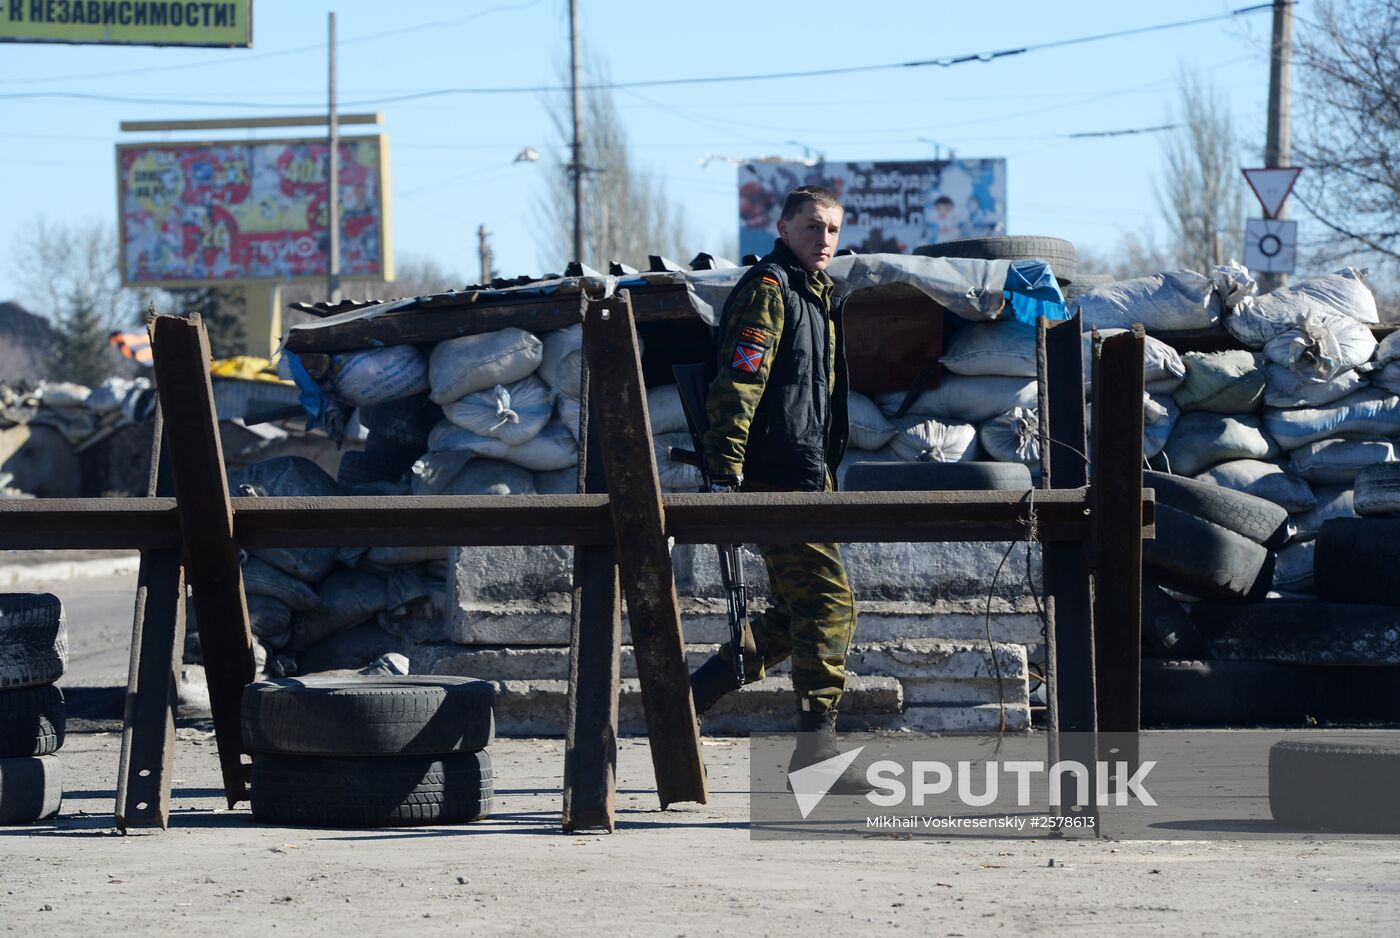 Checkpoint of DPR slef-defense fighters at the exit from Makeyevka